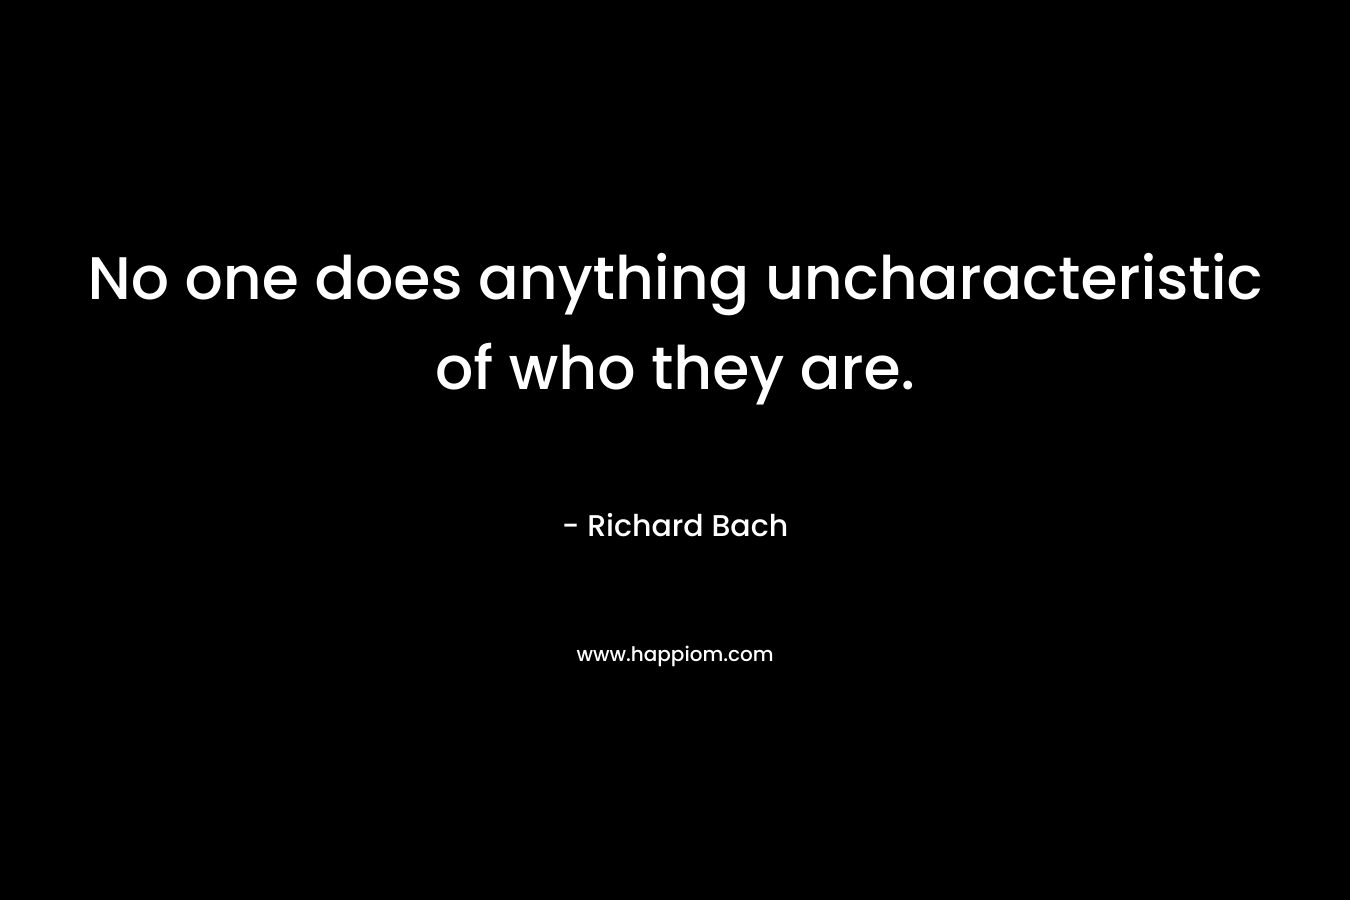 No one does anything uncharacteristic of who they are. – Richard Bach